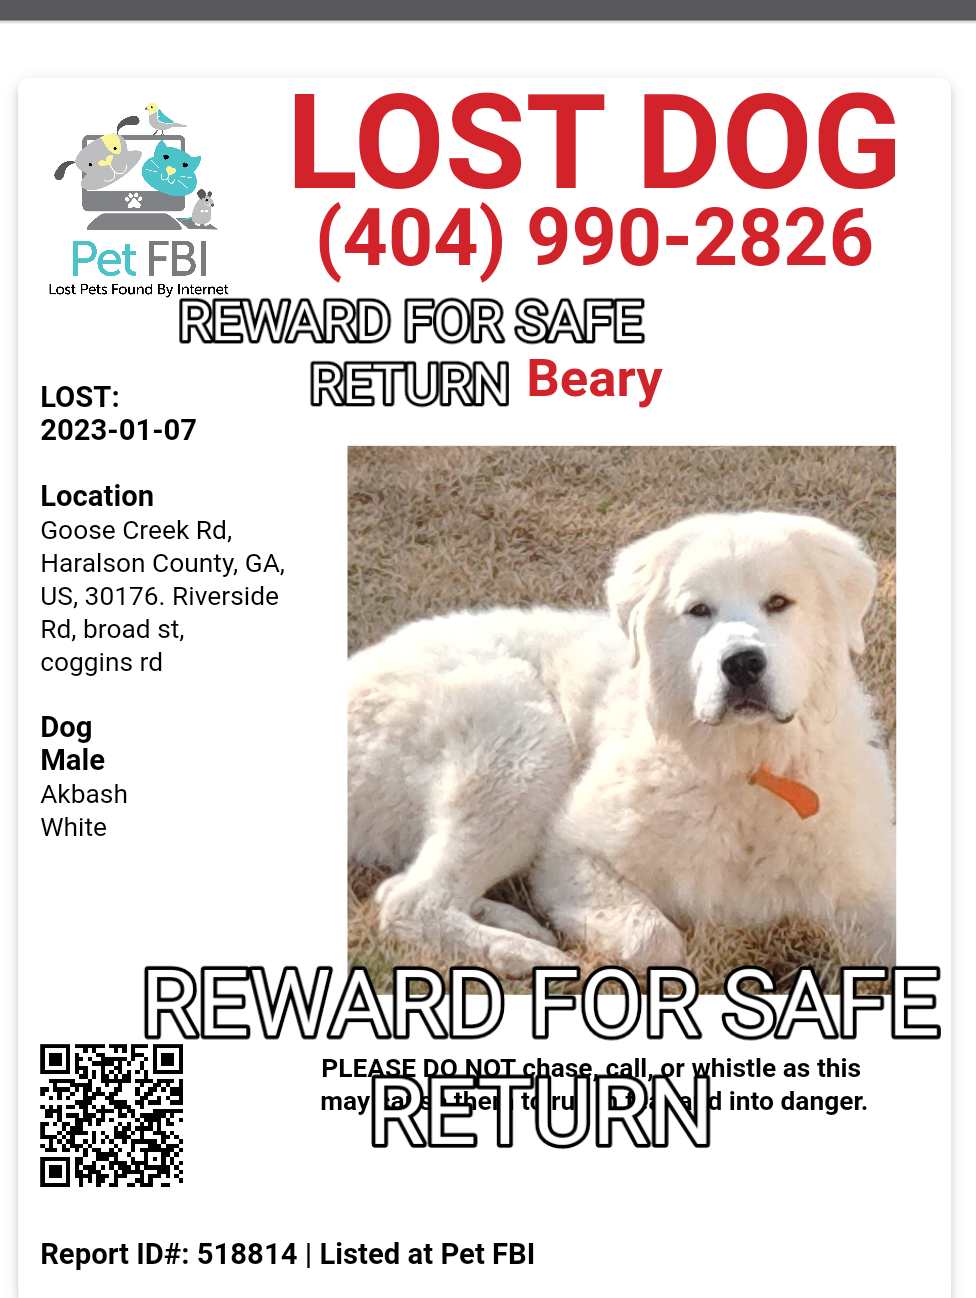 Image of Beary, Lost Dog